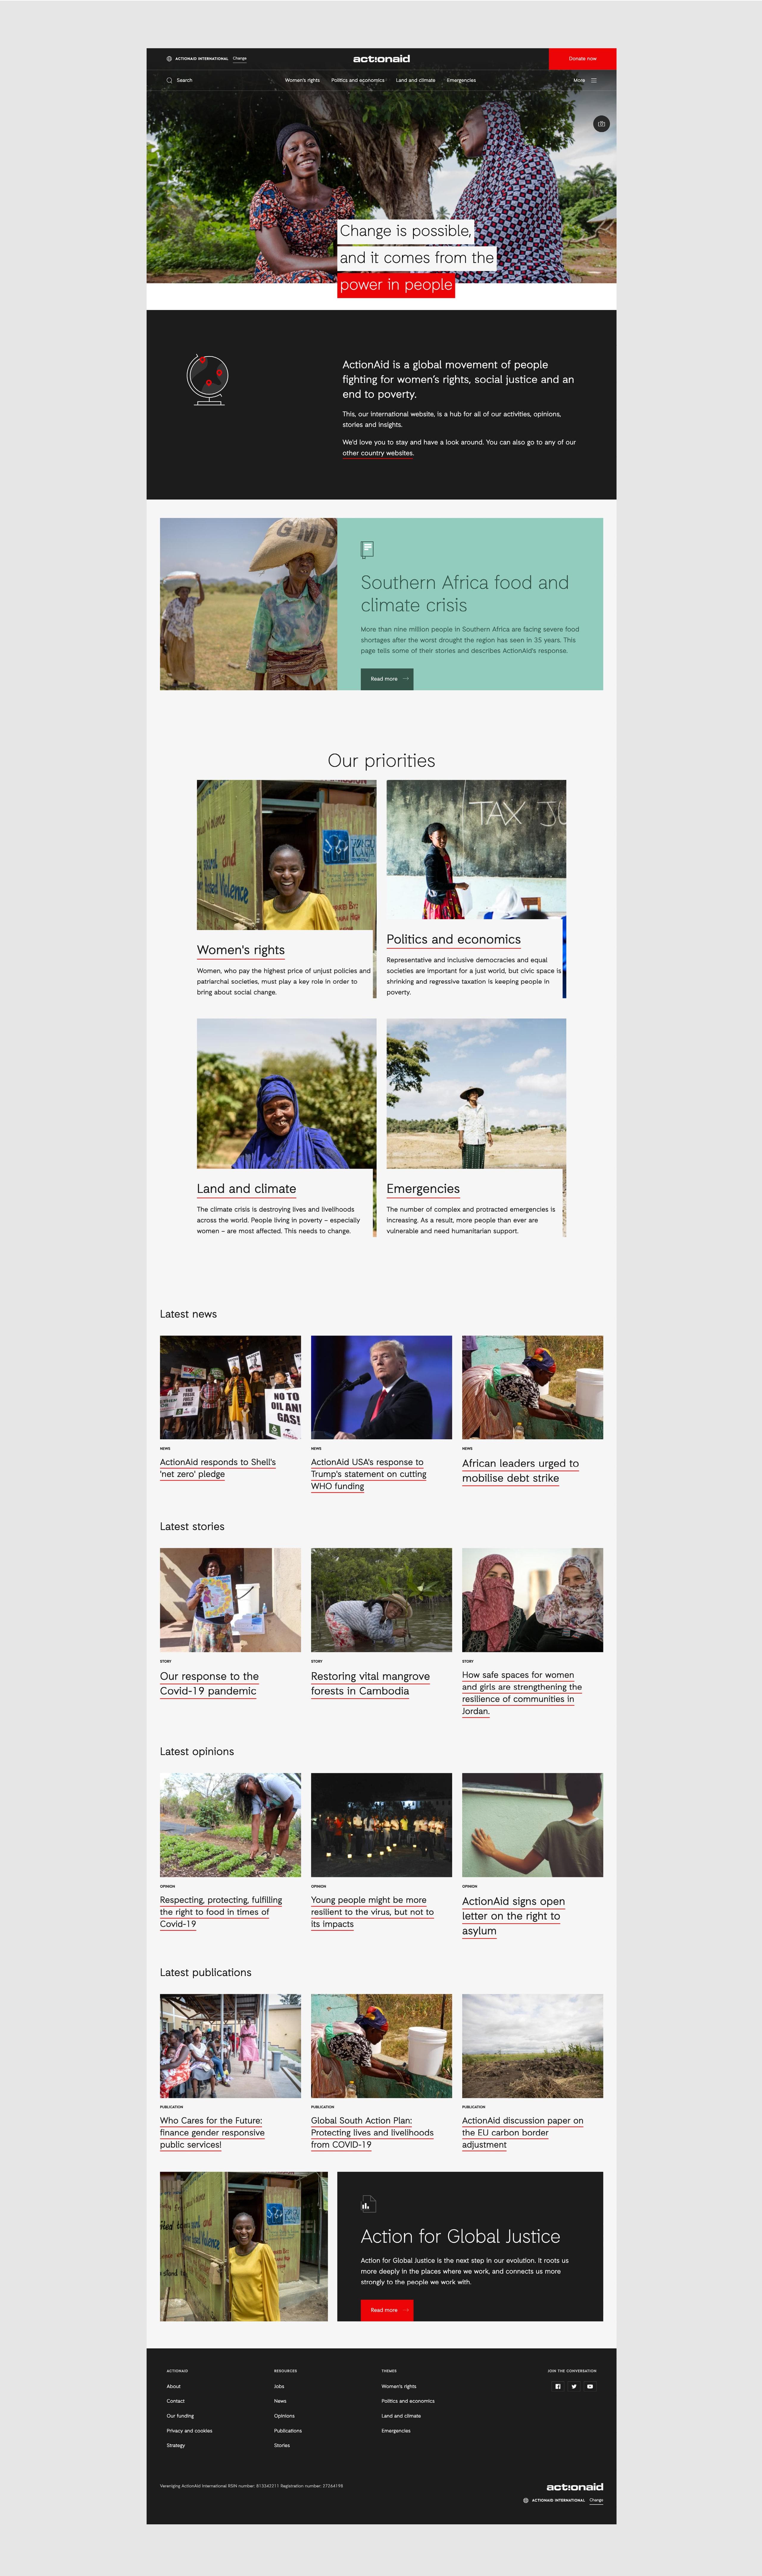 Image of the ActionAid home page